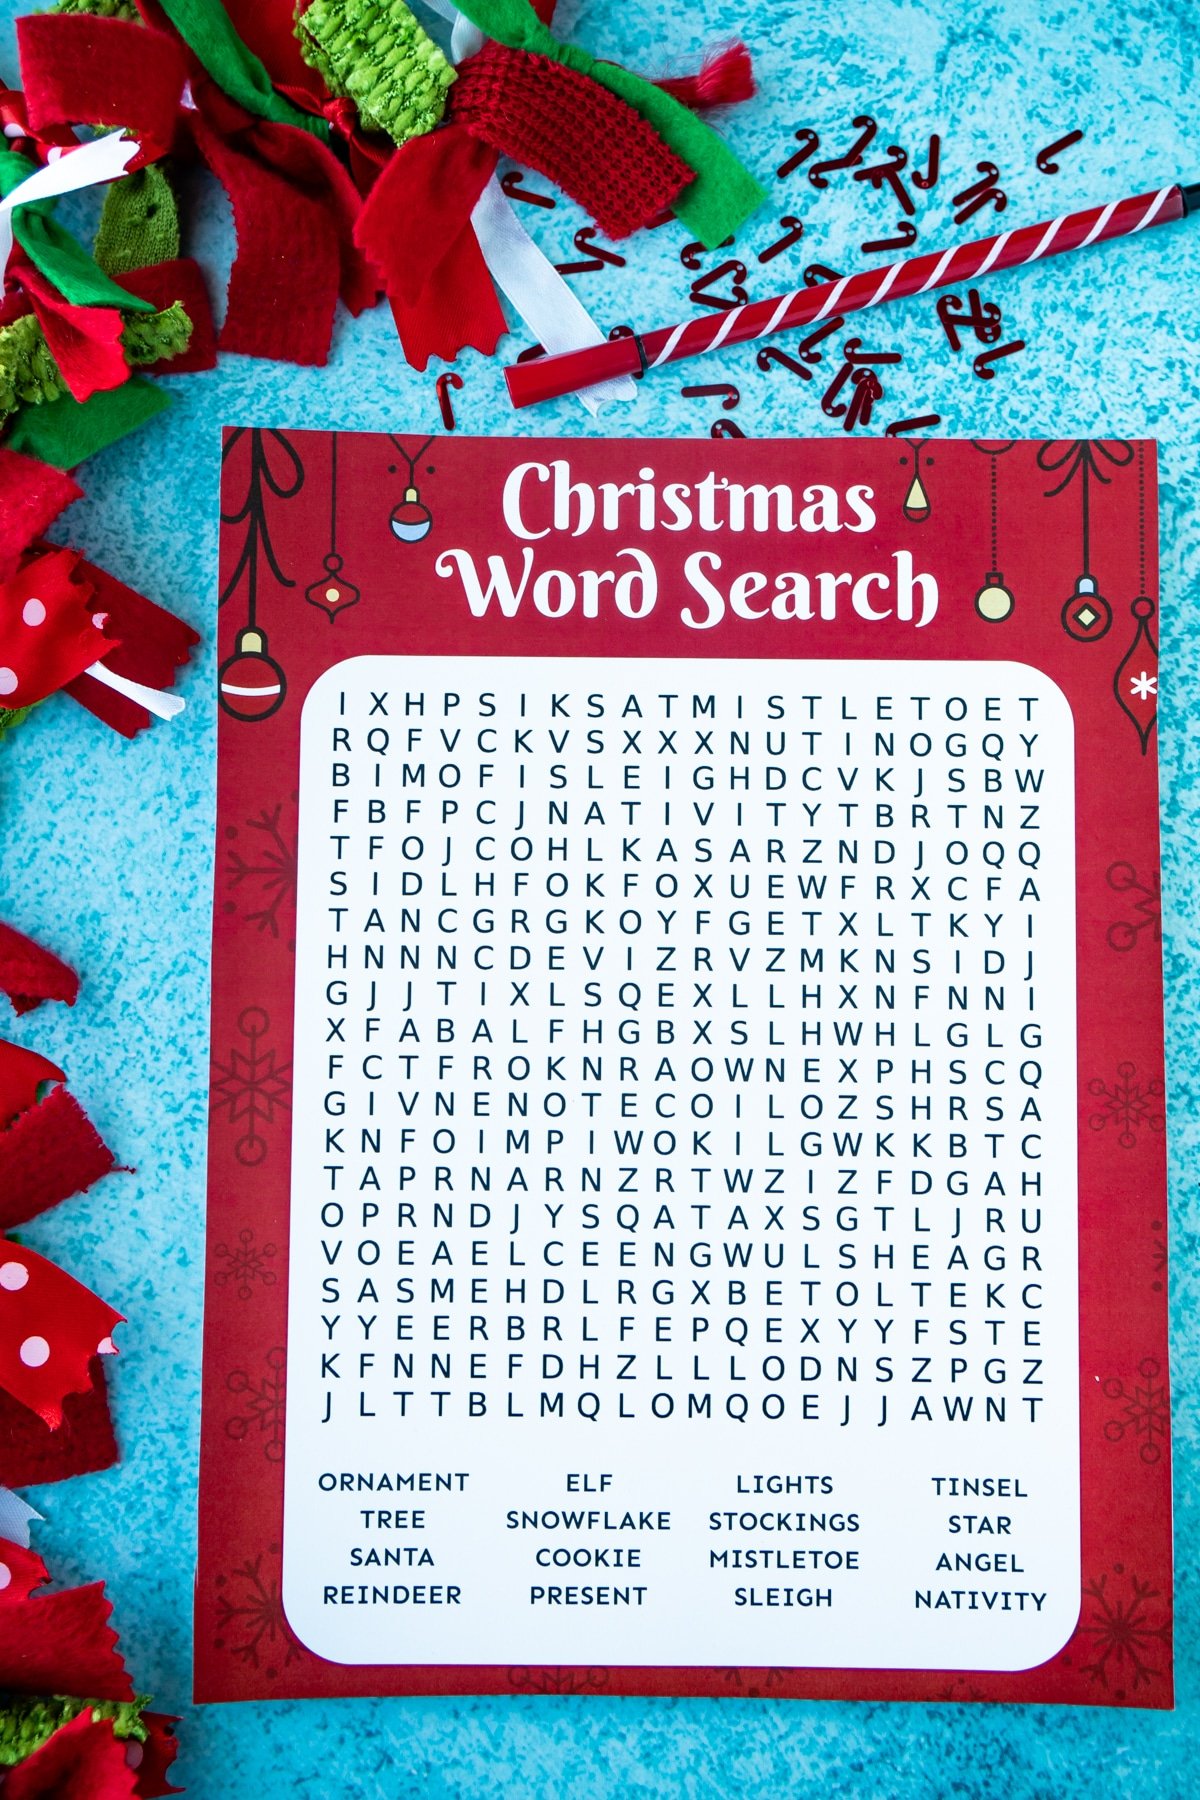 Christmas word search on a blue background